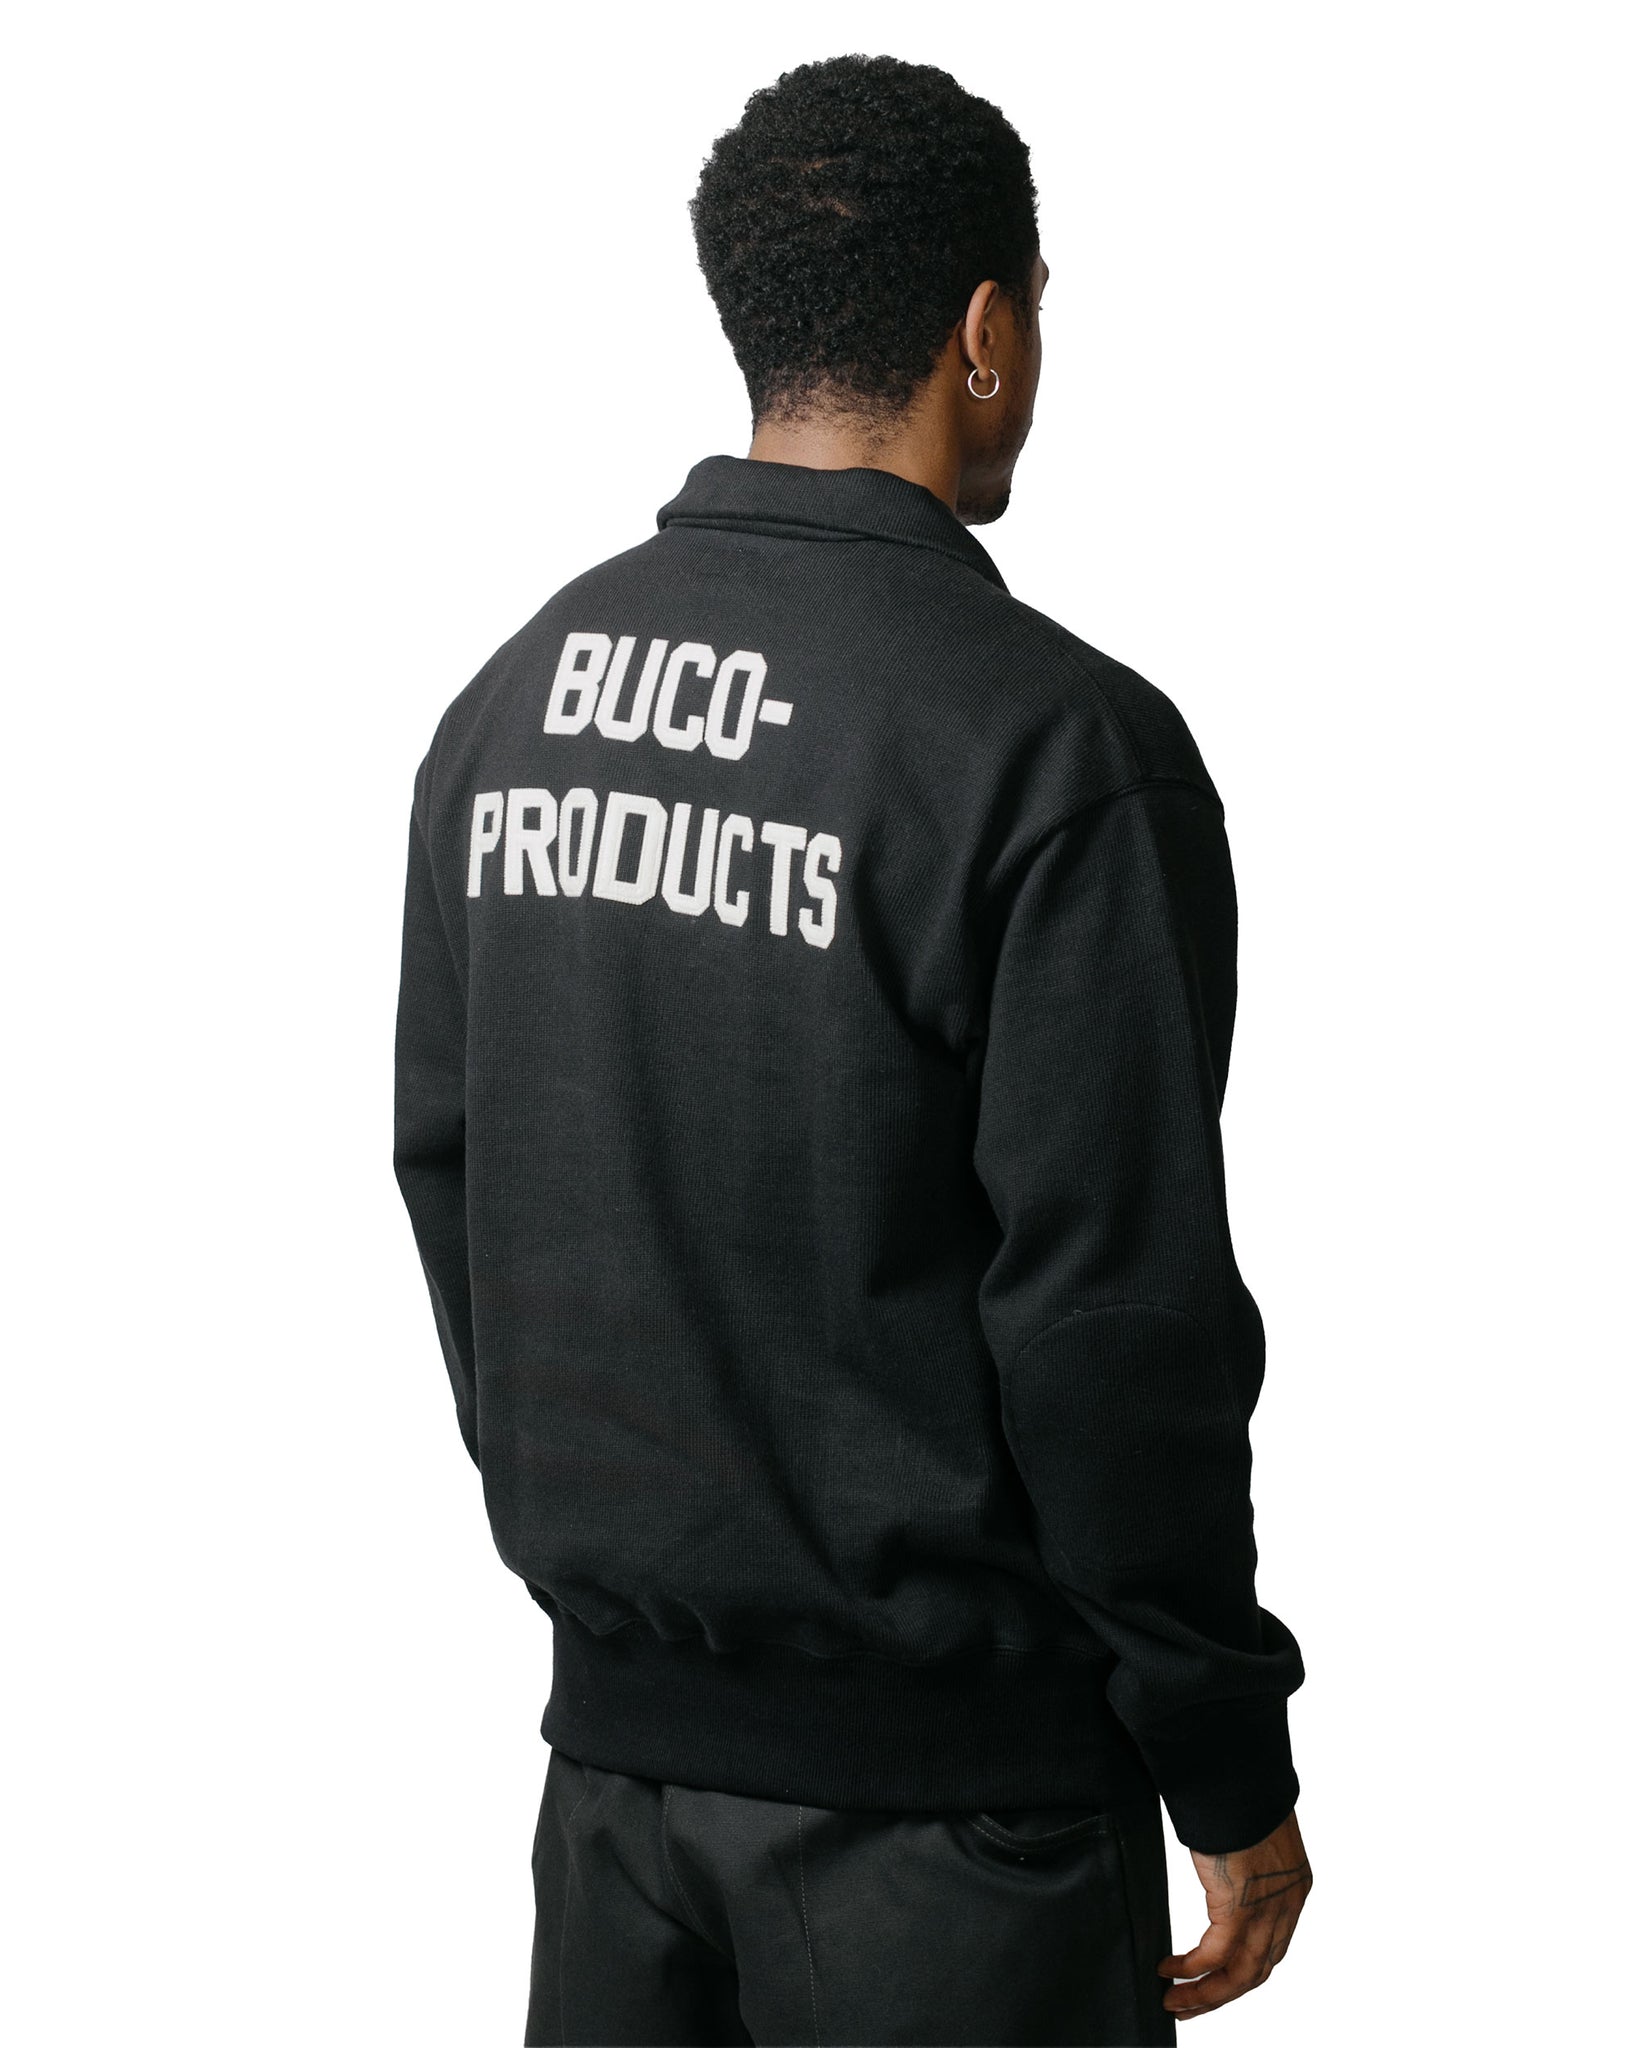 The Real McCoy's BC23104 Buco Half-Zip Motorcycle Jersey / Buco-Product Black model back